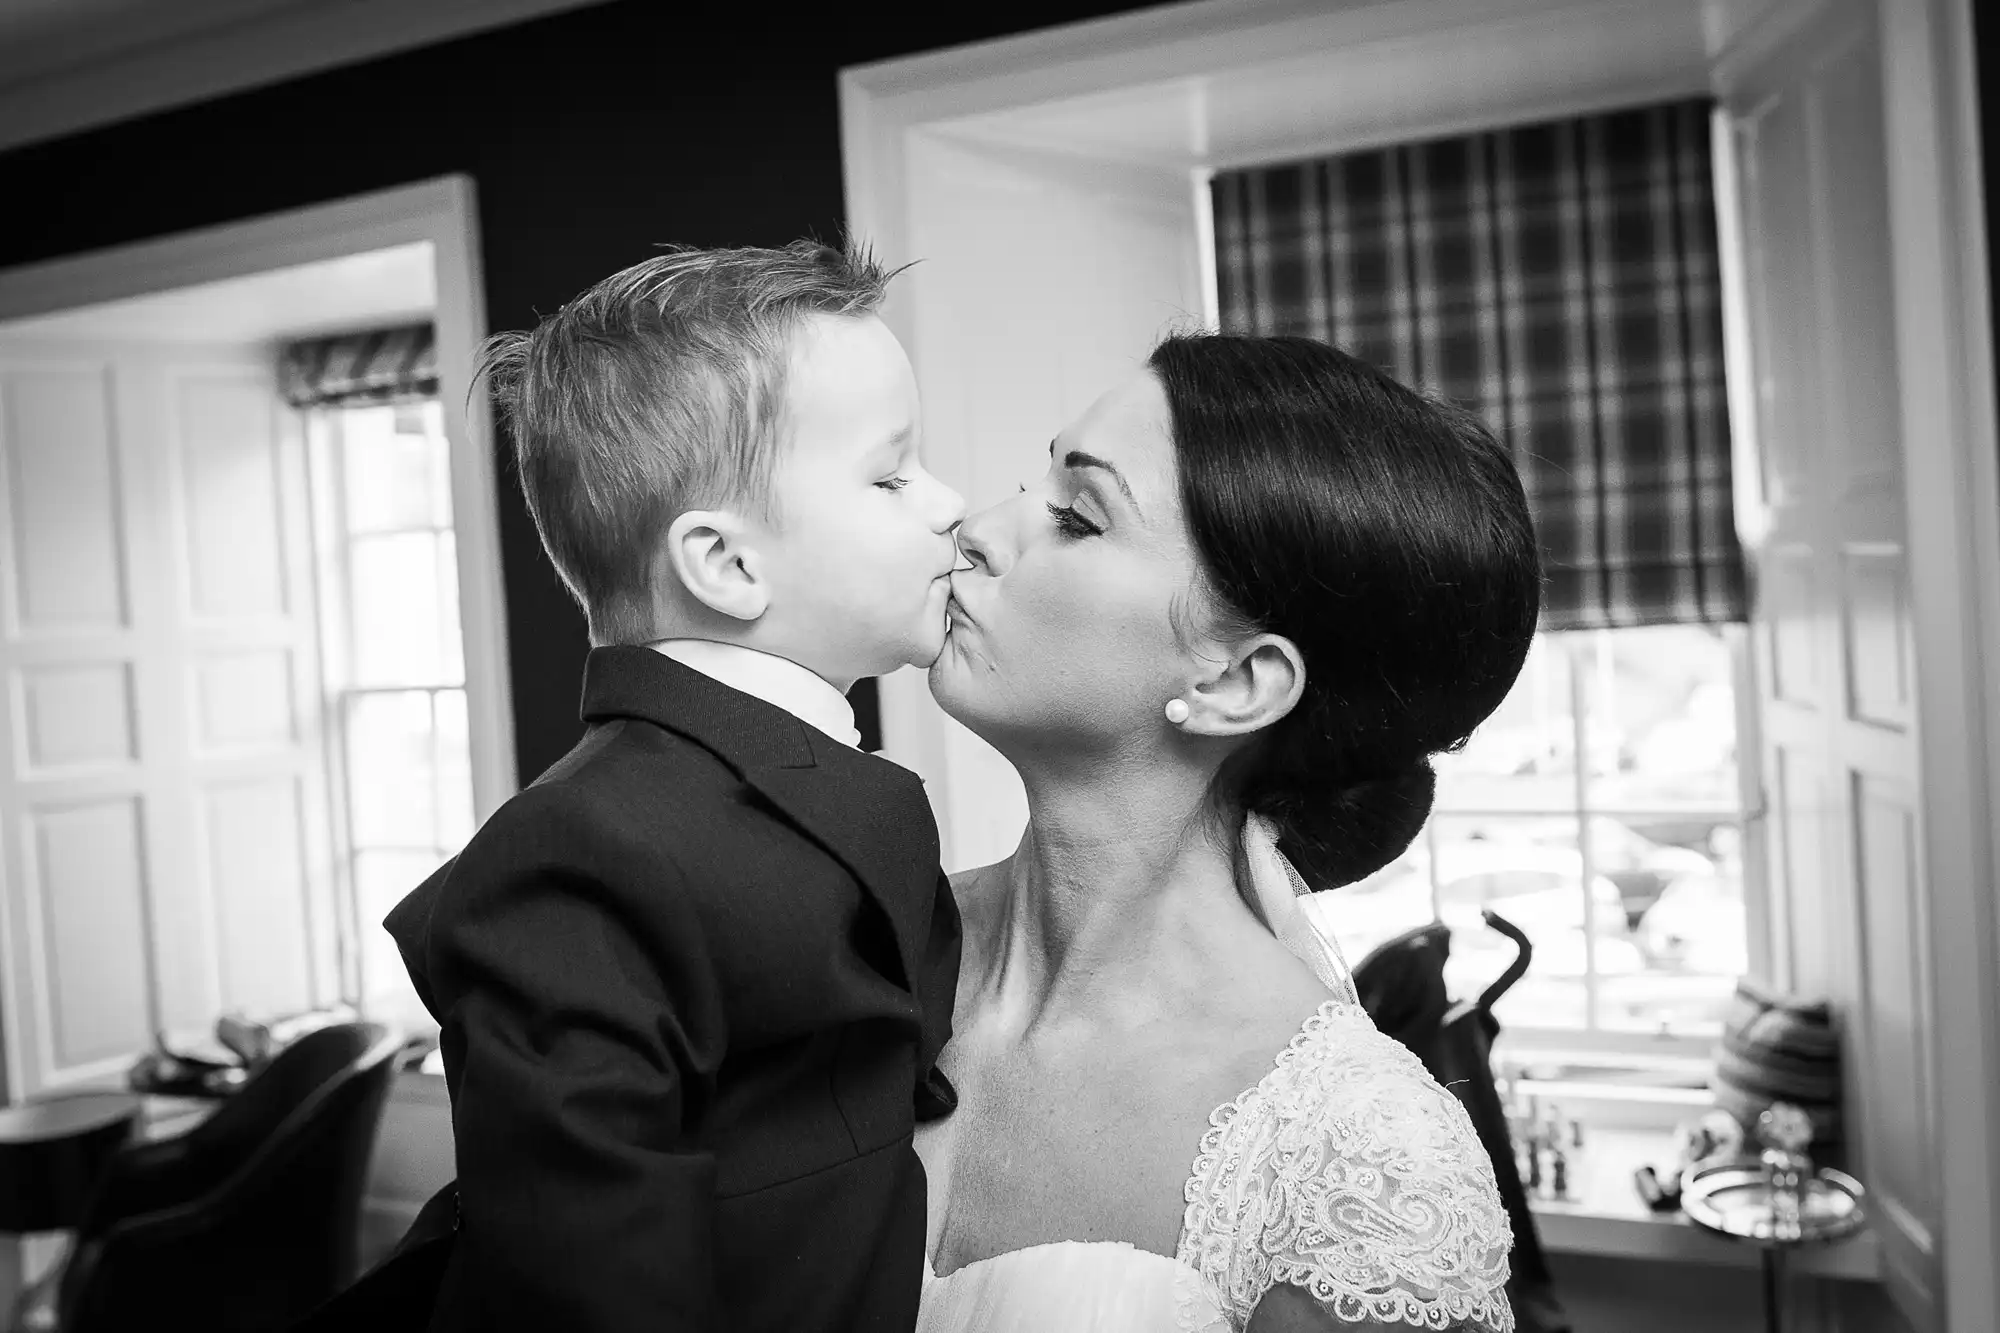 A black and white photo of a young boy in a suit kissing a woman in a lace wedding dress on the cheek.